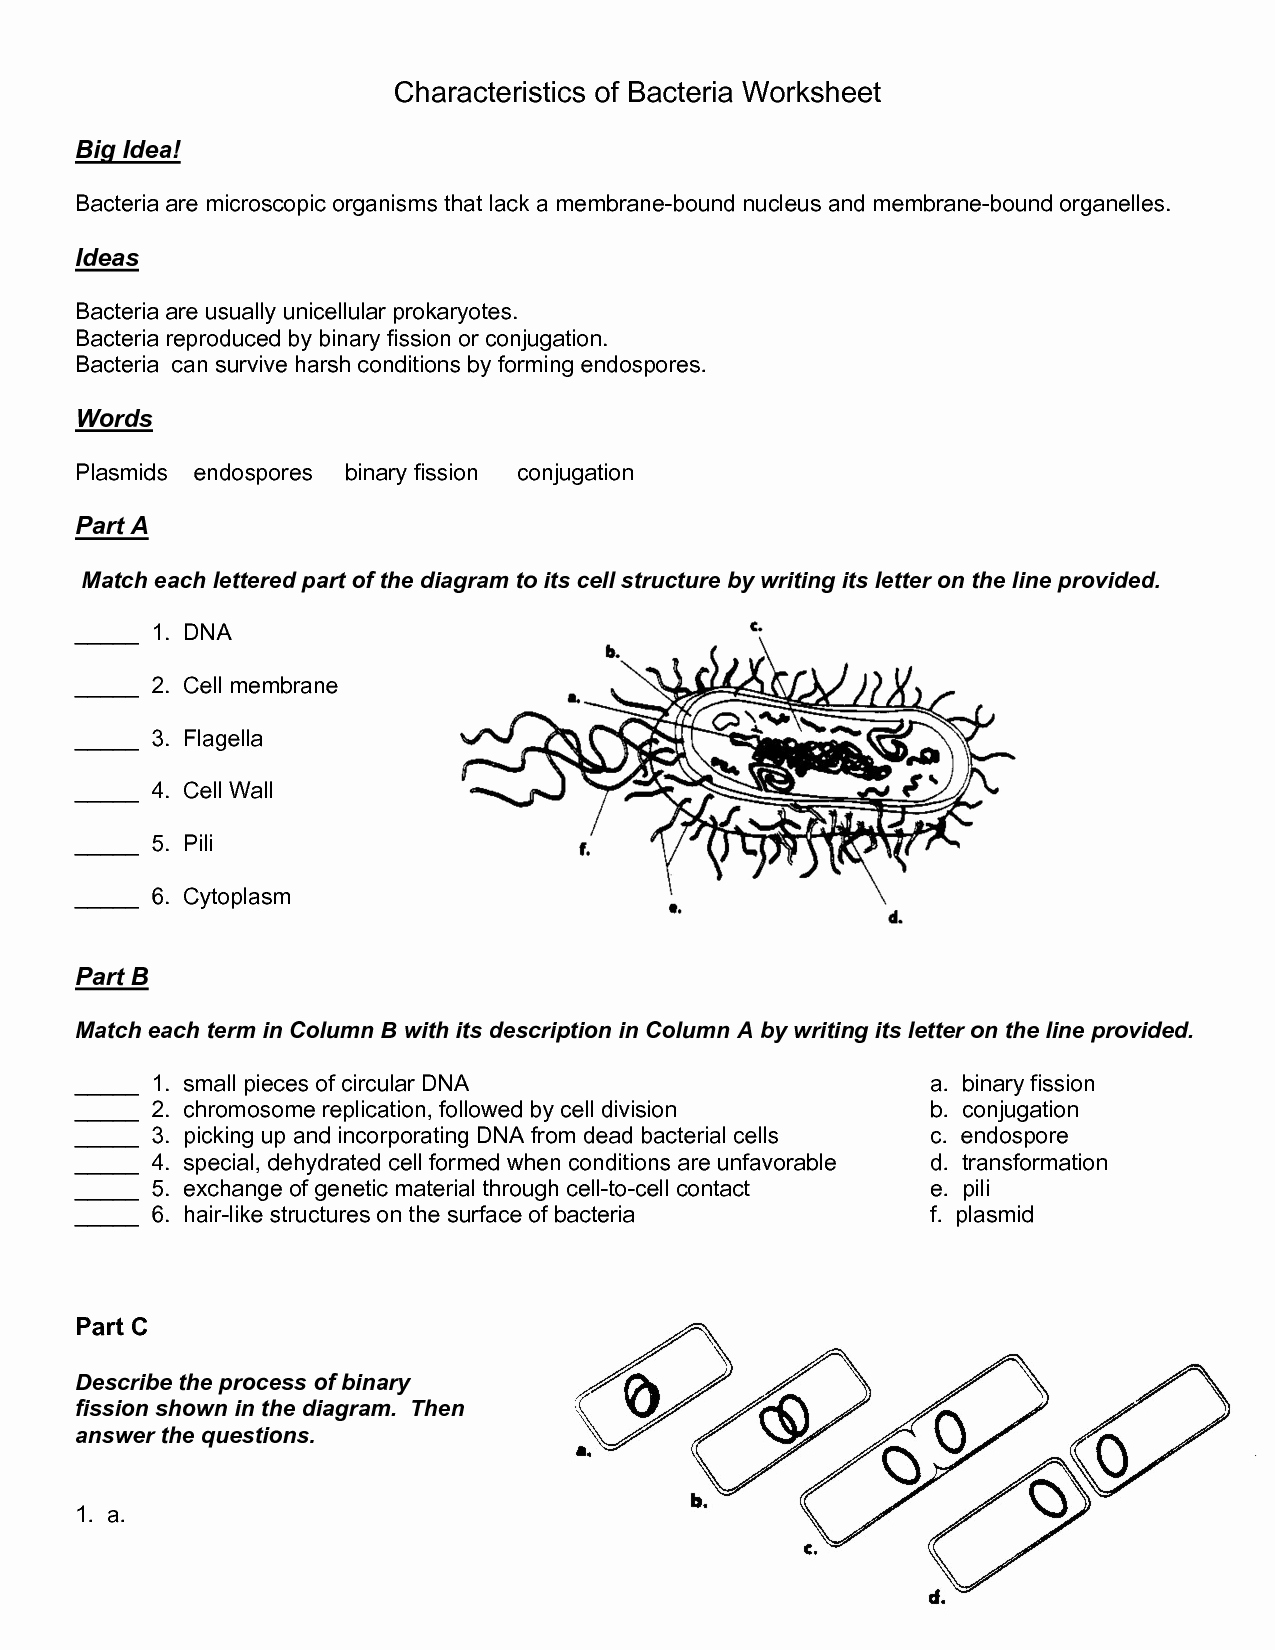 Virus and Bacteria Worksheet Answers Lovely 14 Best Of Viruses and Bacteria Worksheets